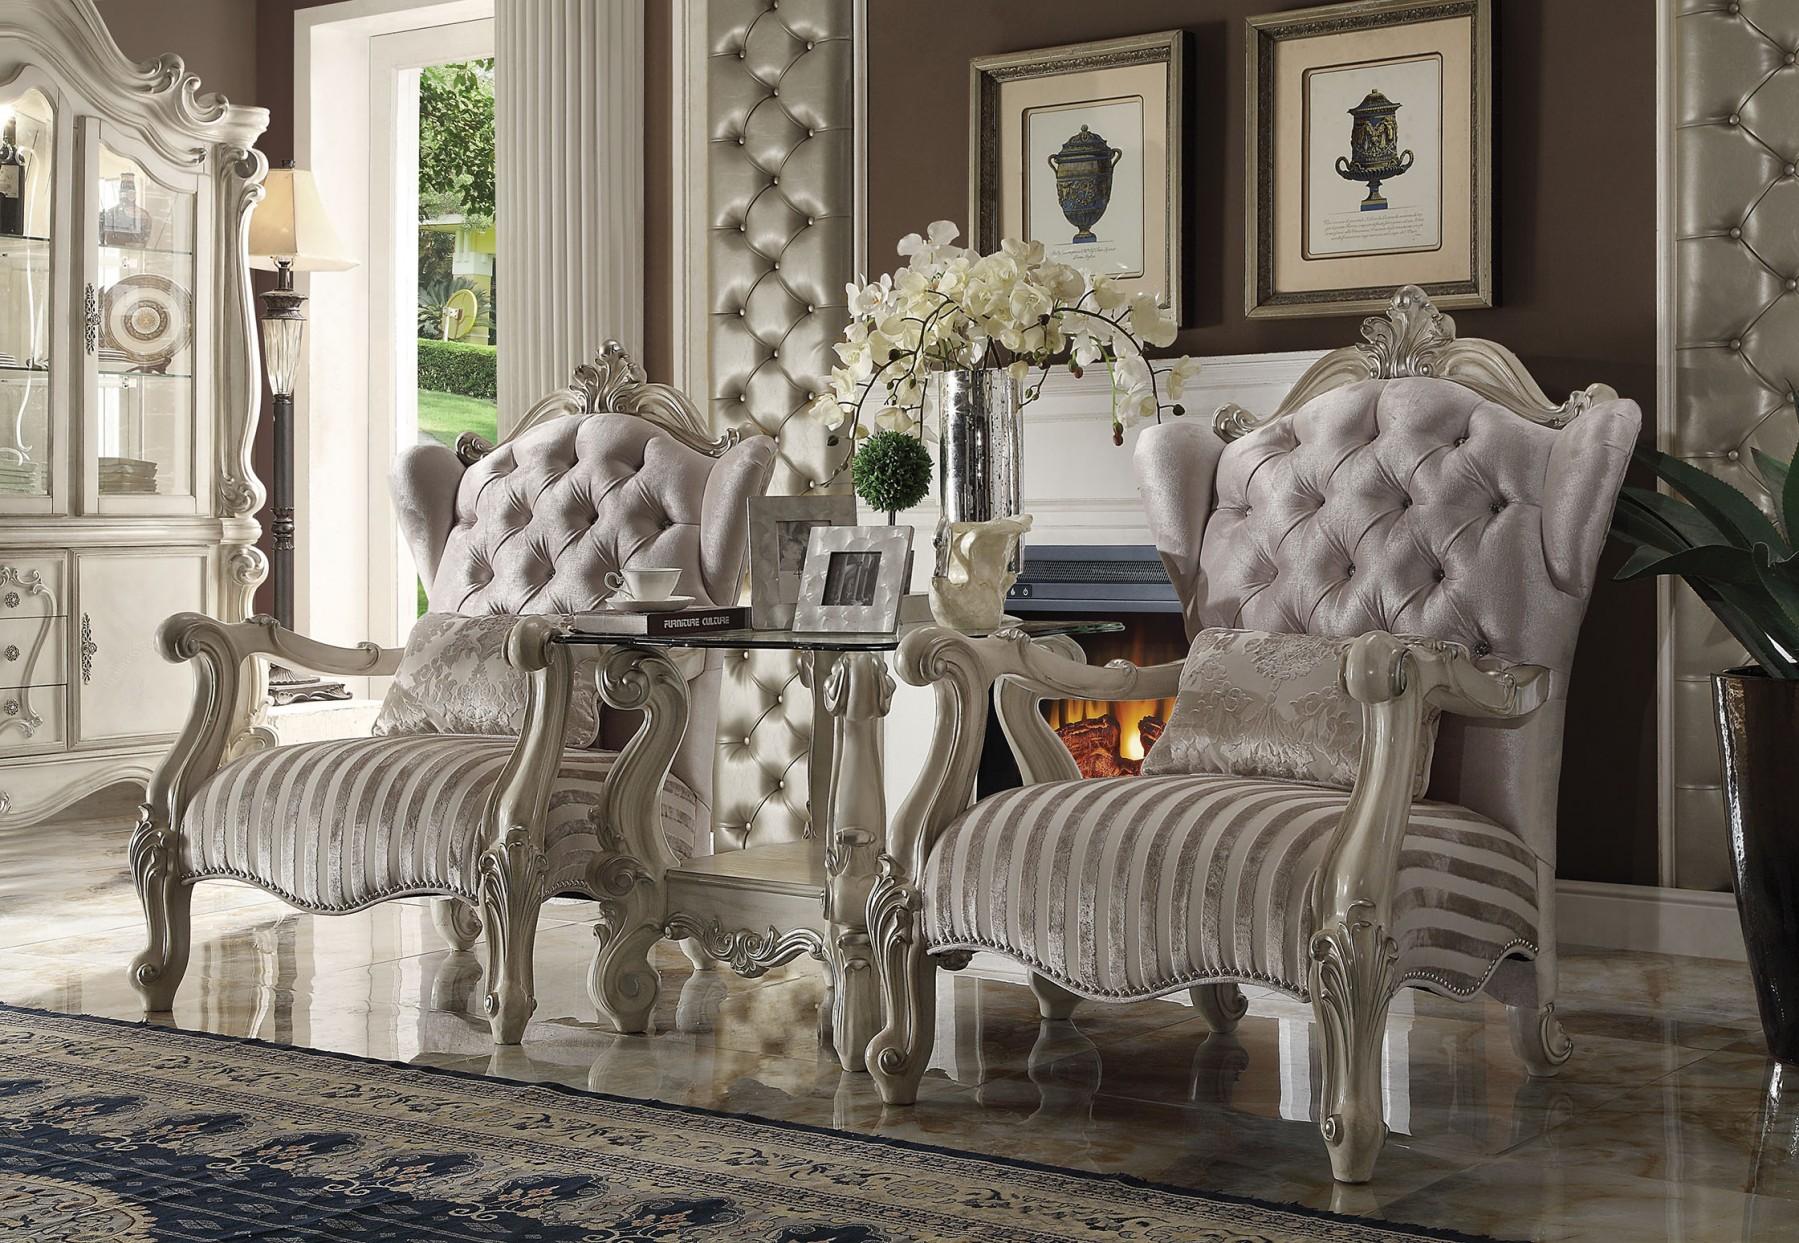 Traditional,  Vintage Armchairs and End Table Versailles-52087 Versailles-52087-Set-3 in Bone, White, Ivory Soft Velvet